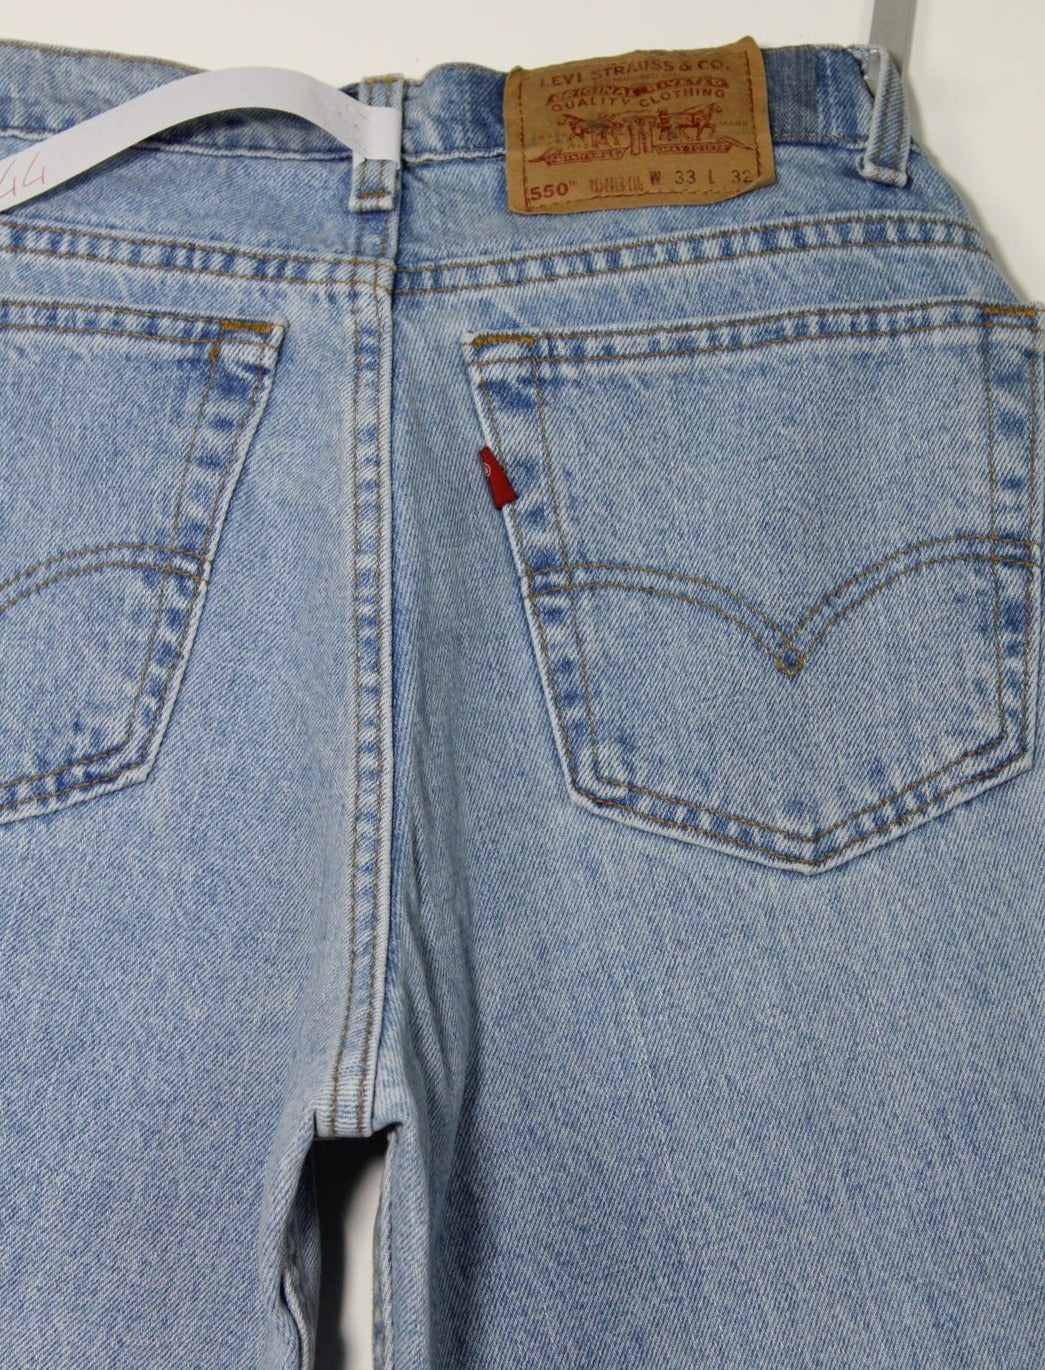 Levi's 550 Relaxed Fit W33 L32 Denim Made In USA Jeans Vintage